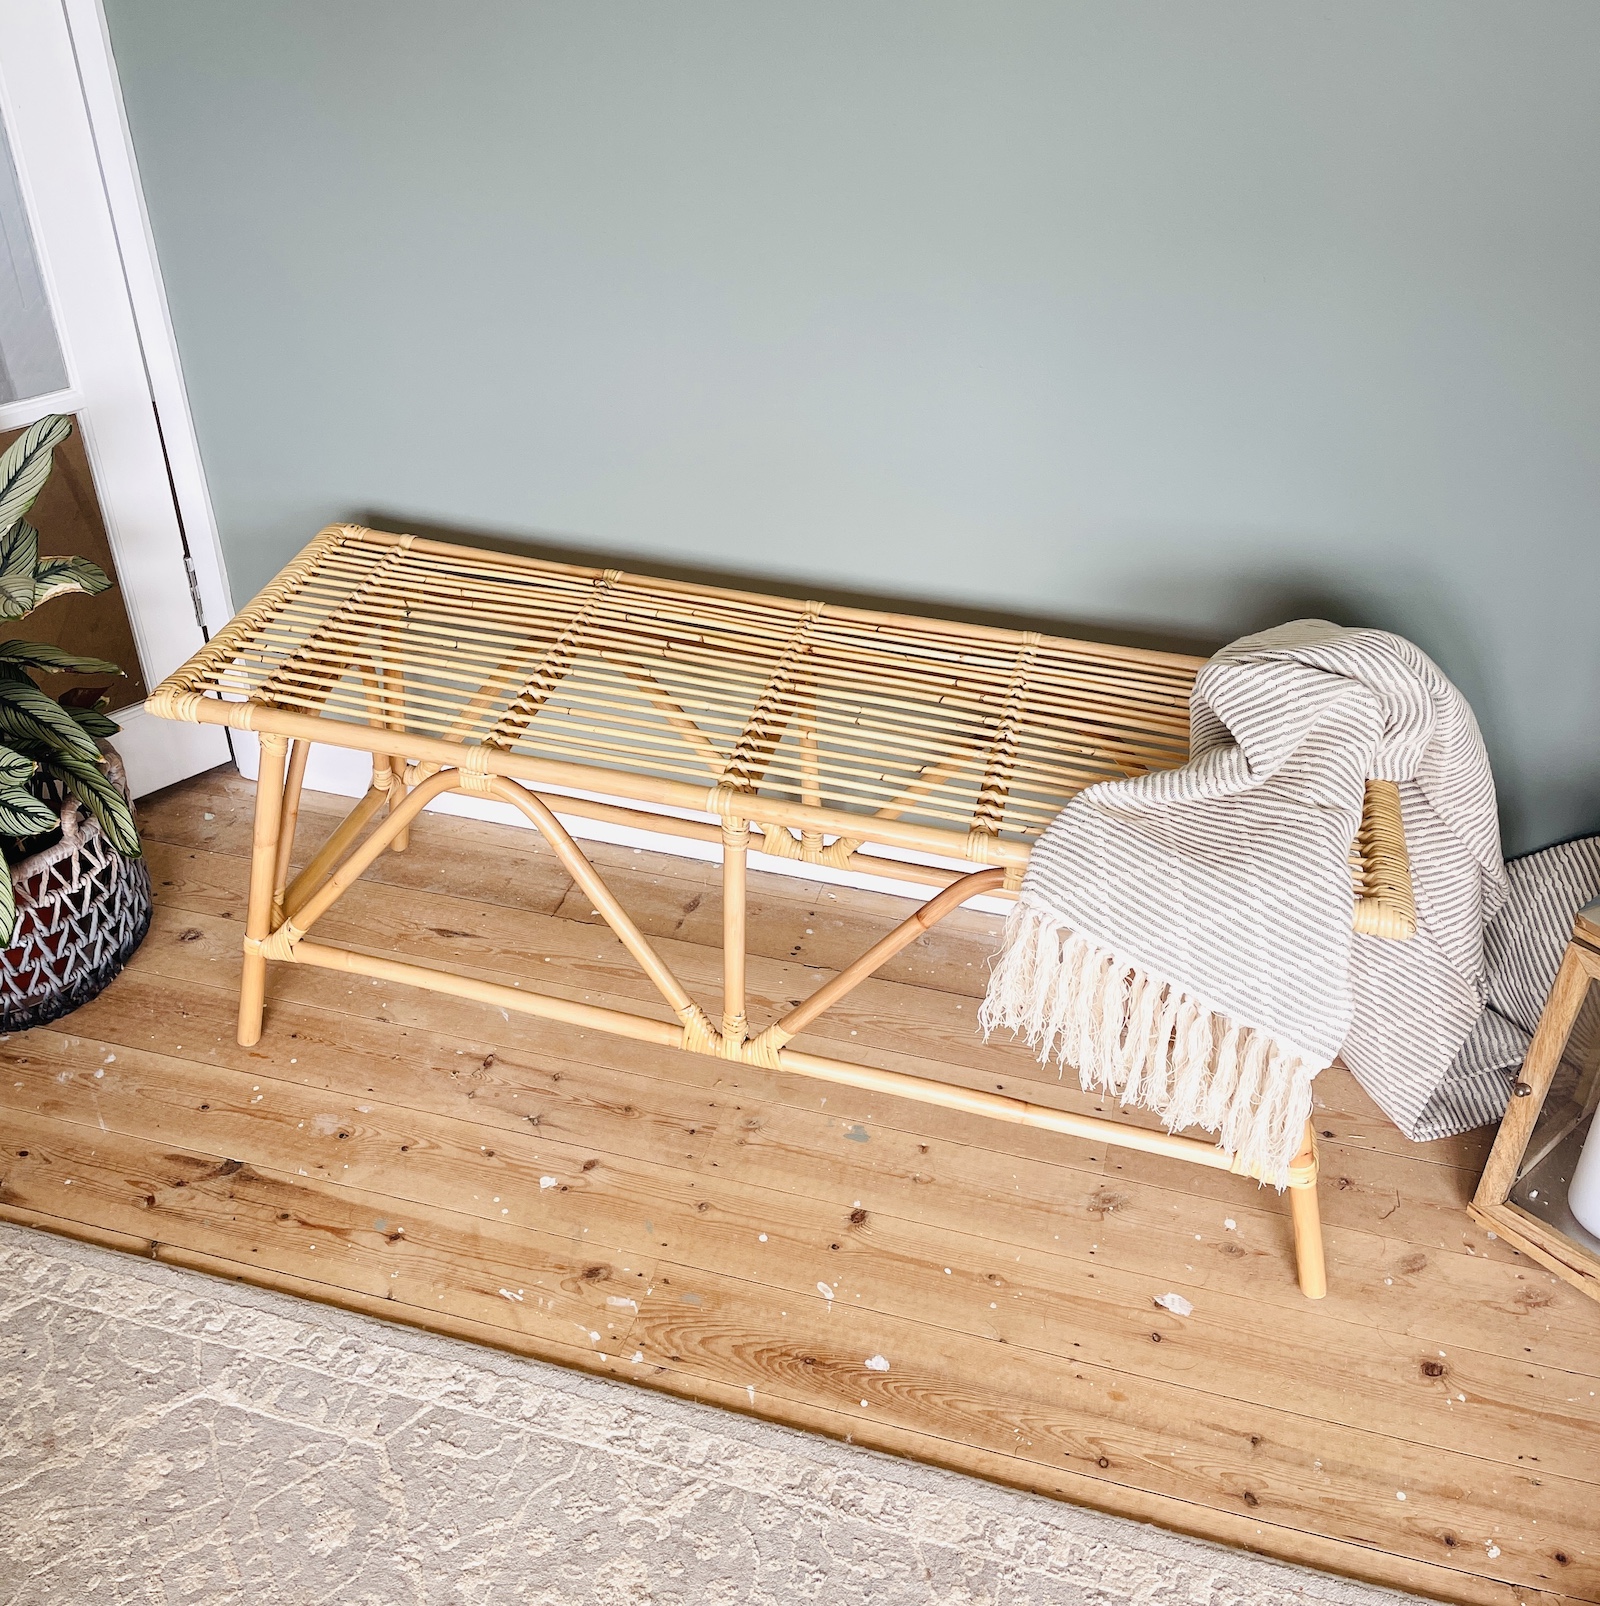 Bamboo bench on wood floor with throw